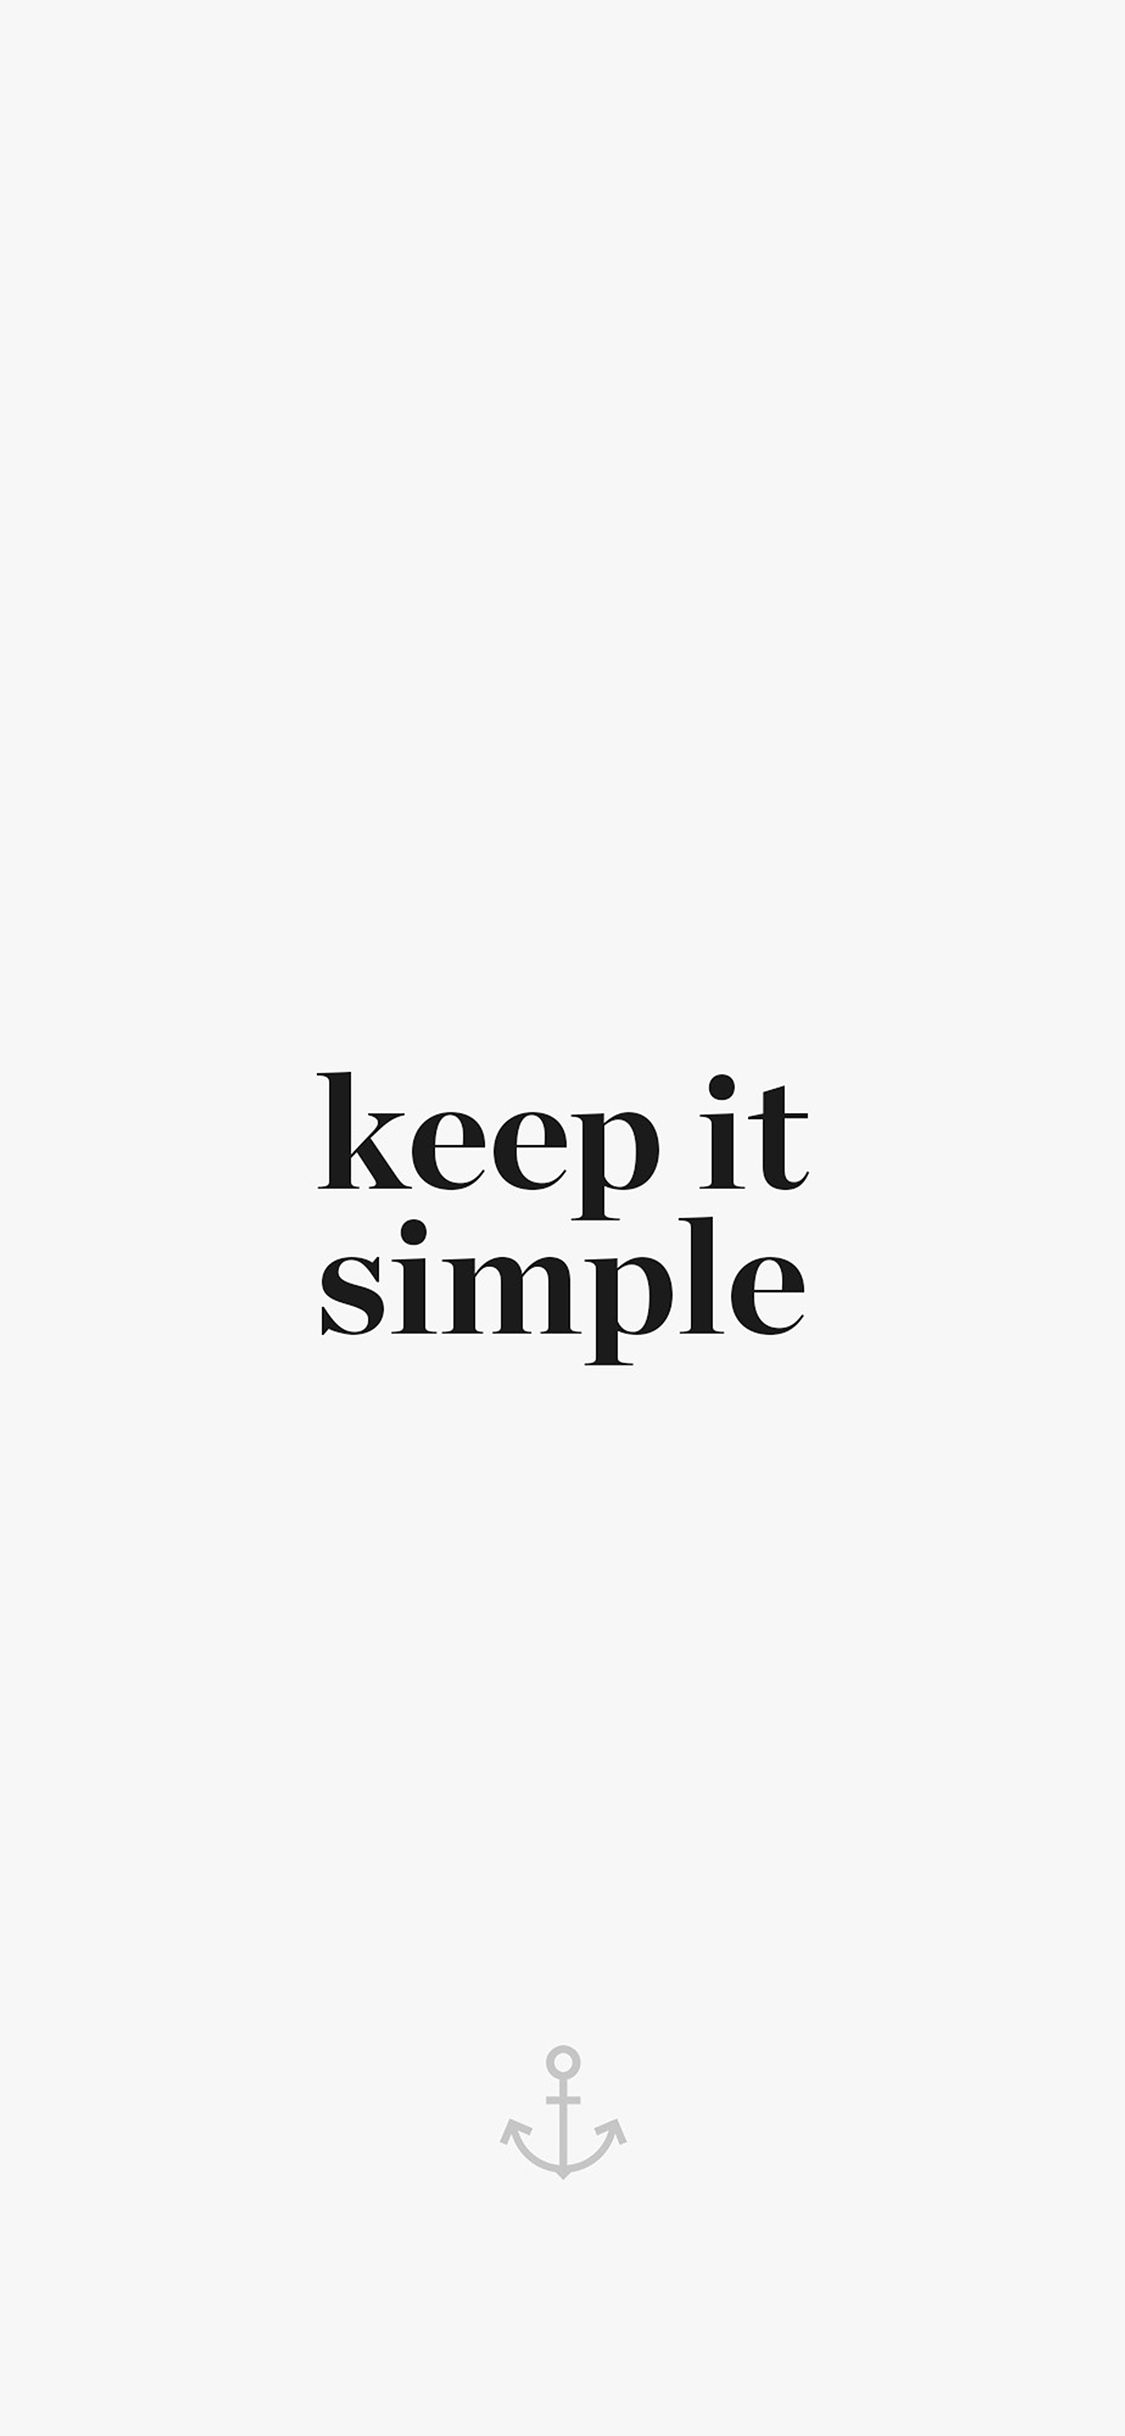 iPhone X wallpaper. keep it simple word quote white illustration art